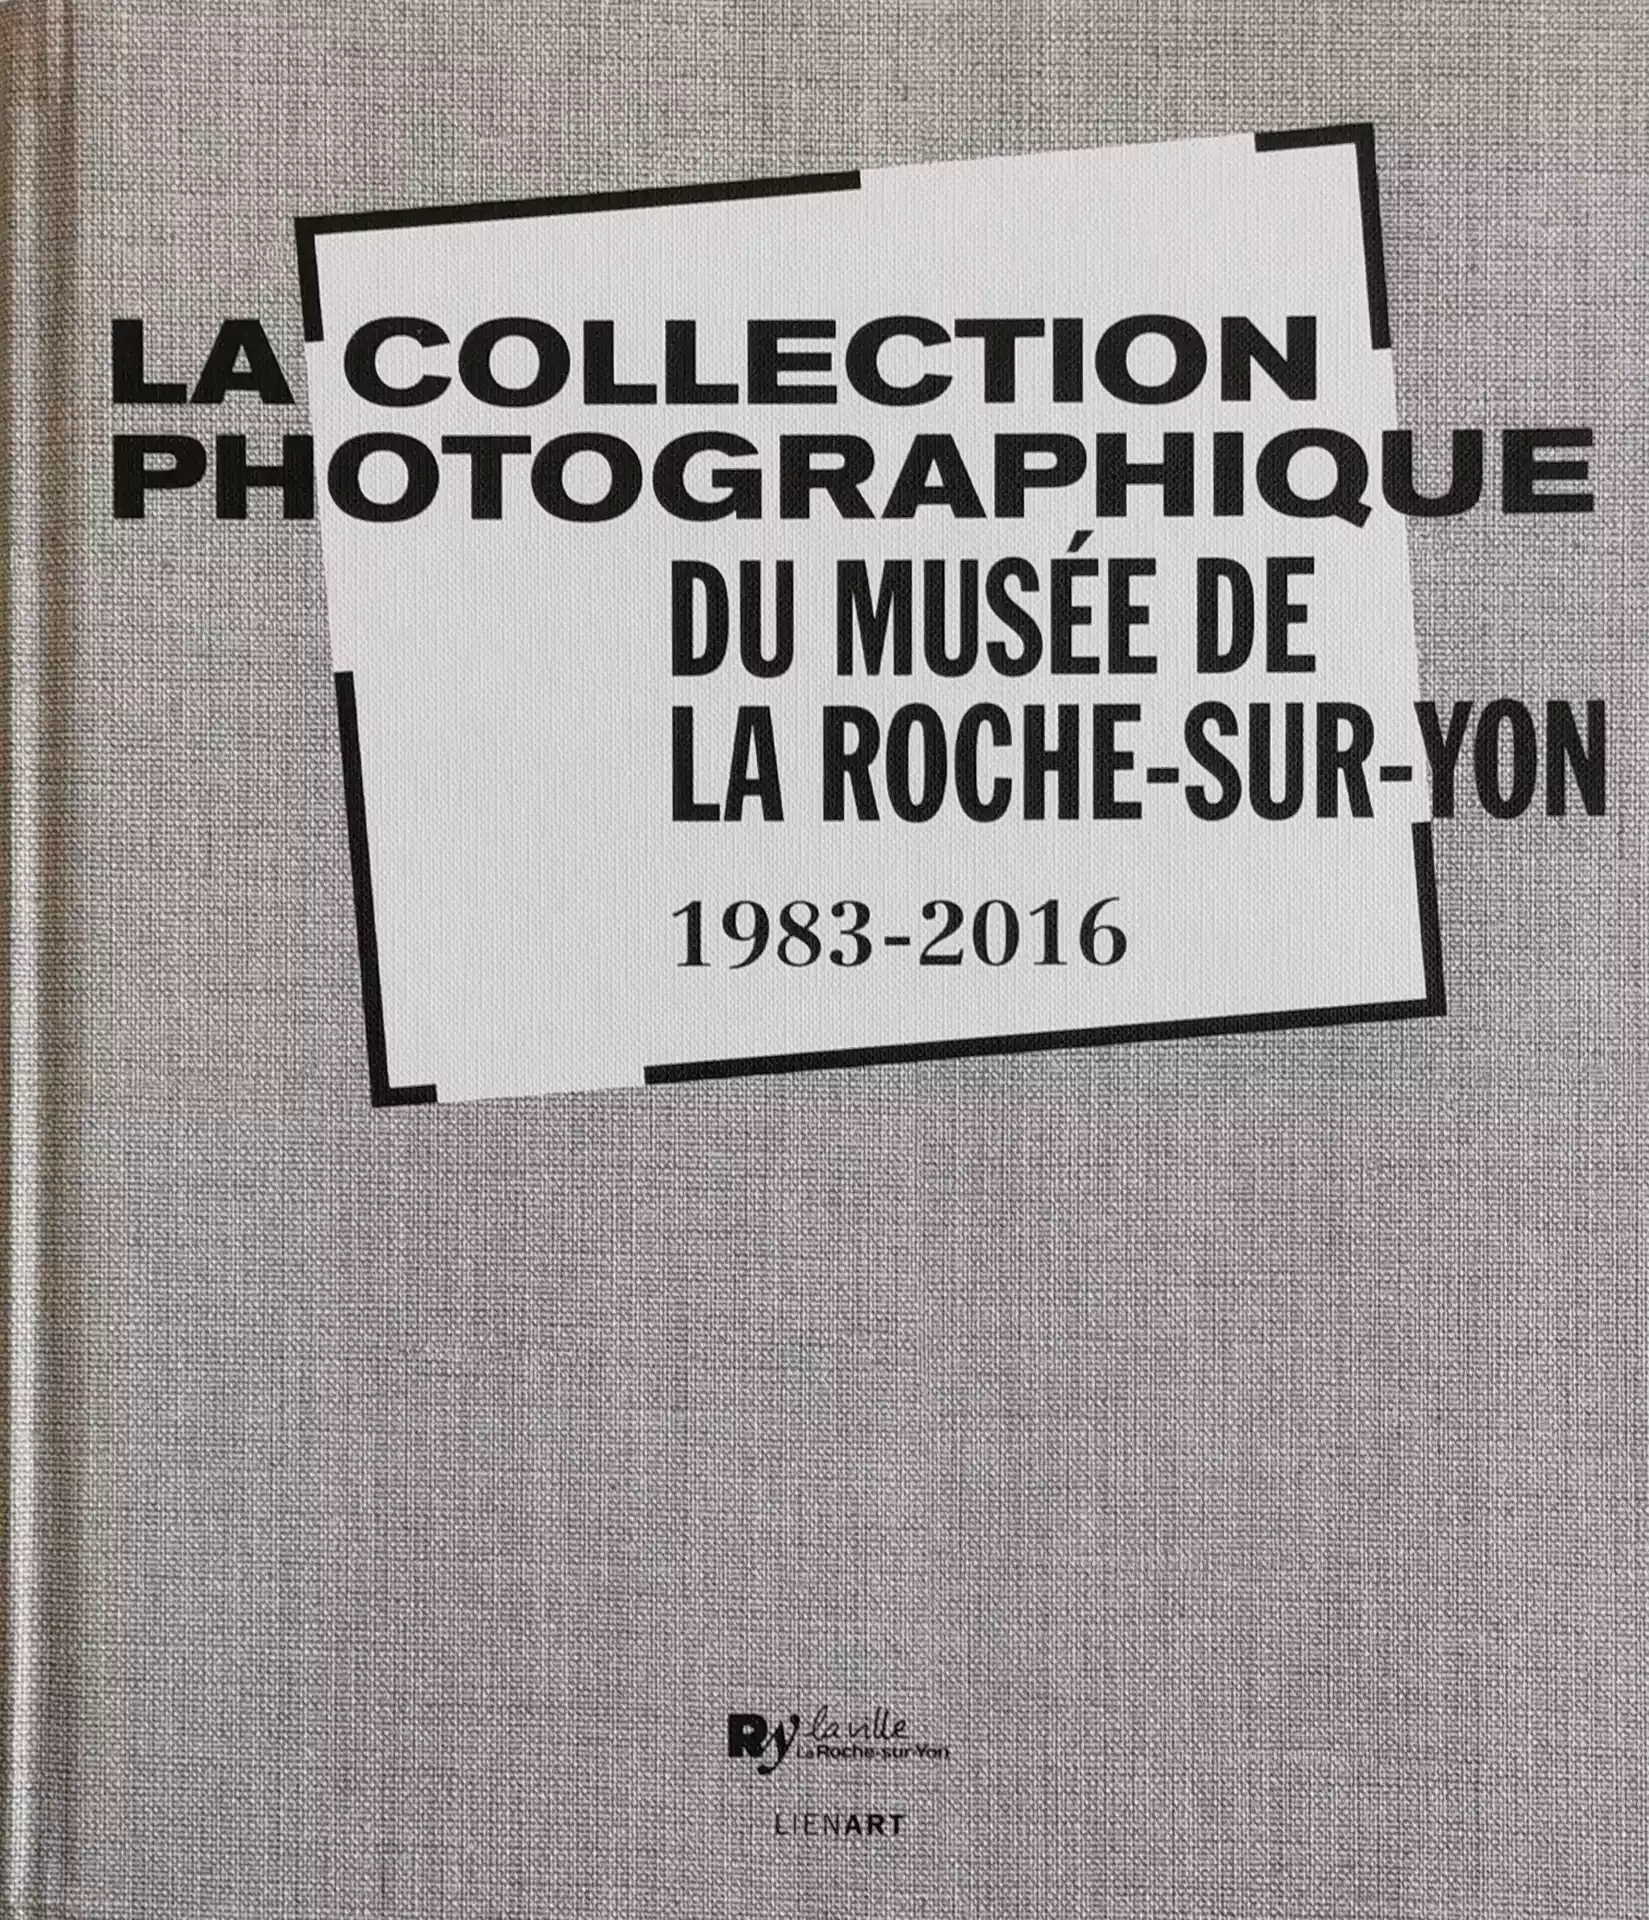 Catalogue_Musee_Roche_sur_Yon_collection.